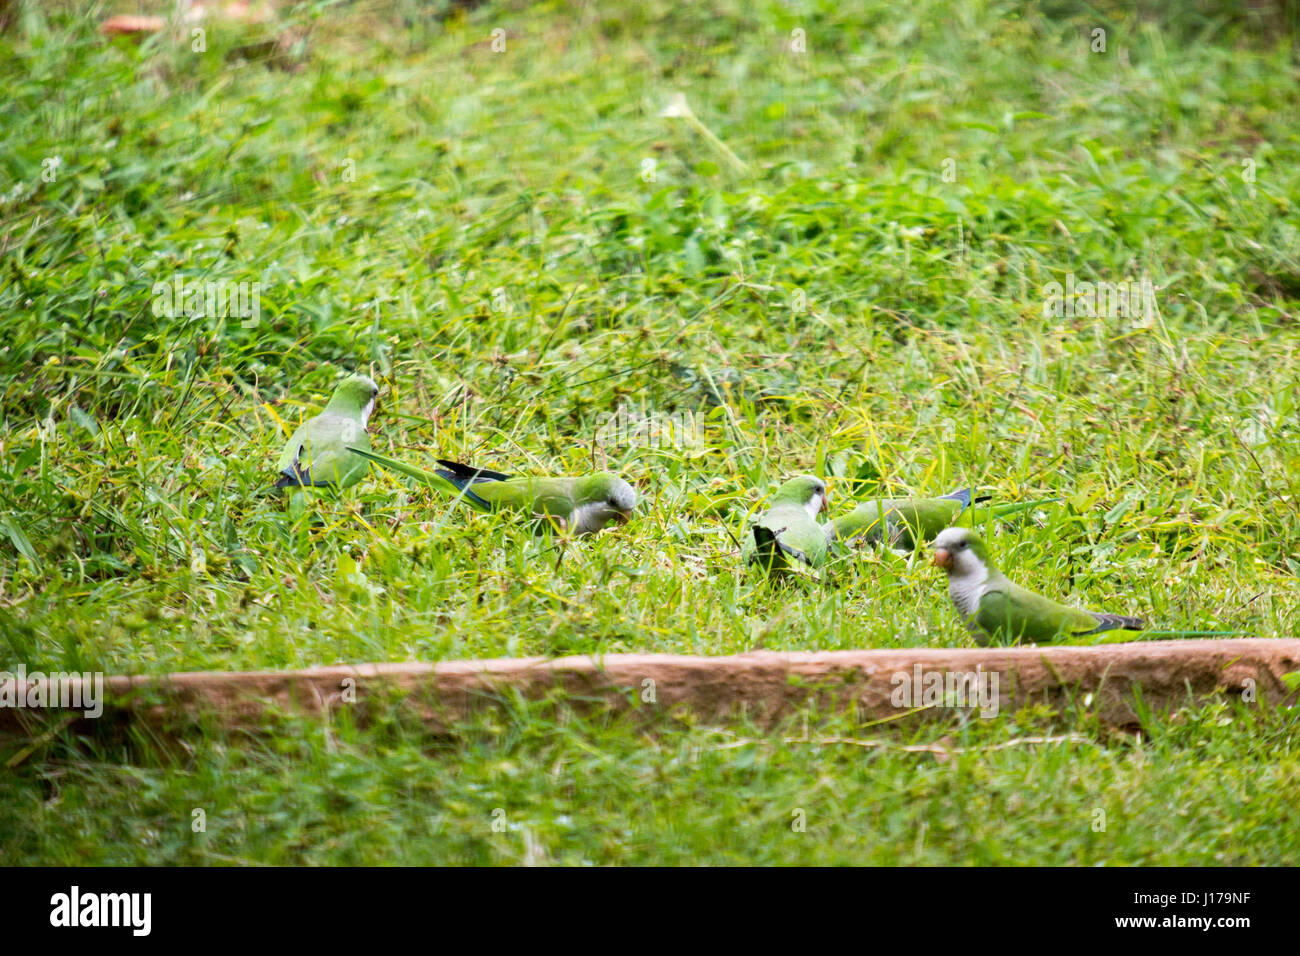 Asuncion, Paraguay. 18th Apr, 2017. Monk parakeets (Myiopsitta monachus), also known as the Quaker parrot, feed on the ground on a cloudy afternoon in Asuncion, Paraguay. Credit: Andre M. Chang/Alamy Live News Stock Photo